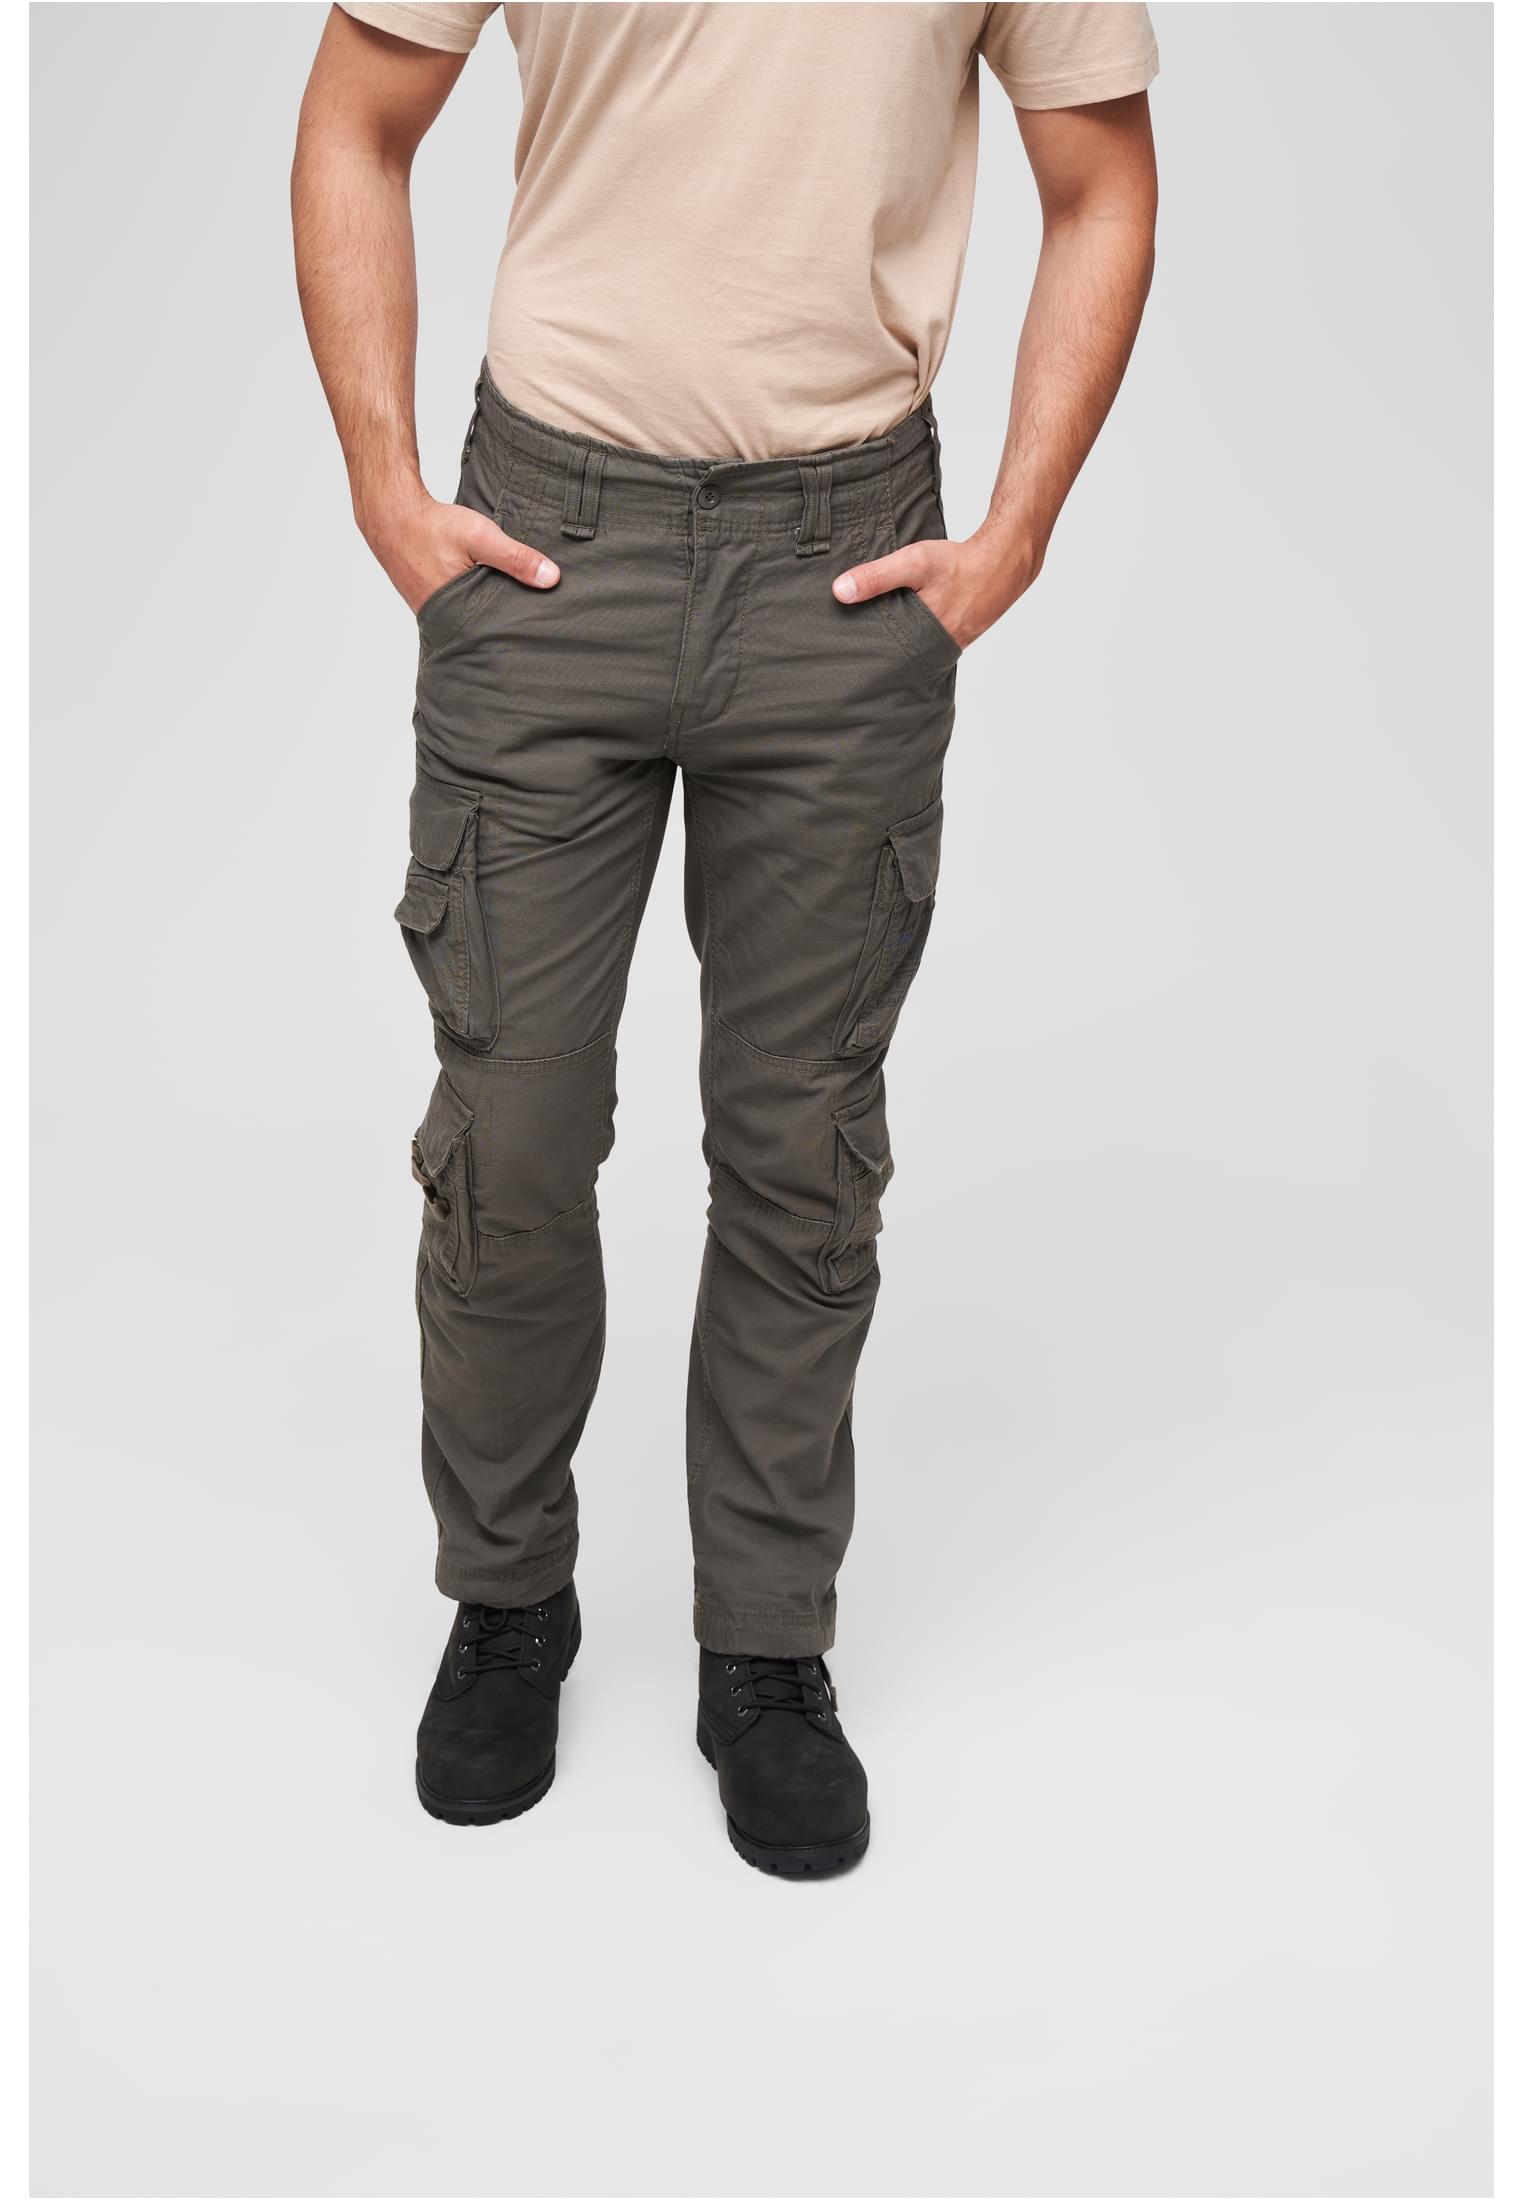 Hosen Pure Slim Fit Trouser in Farbe olive